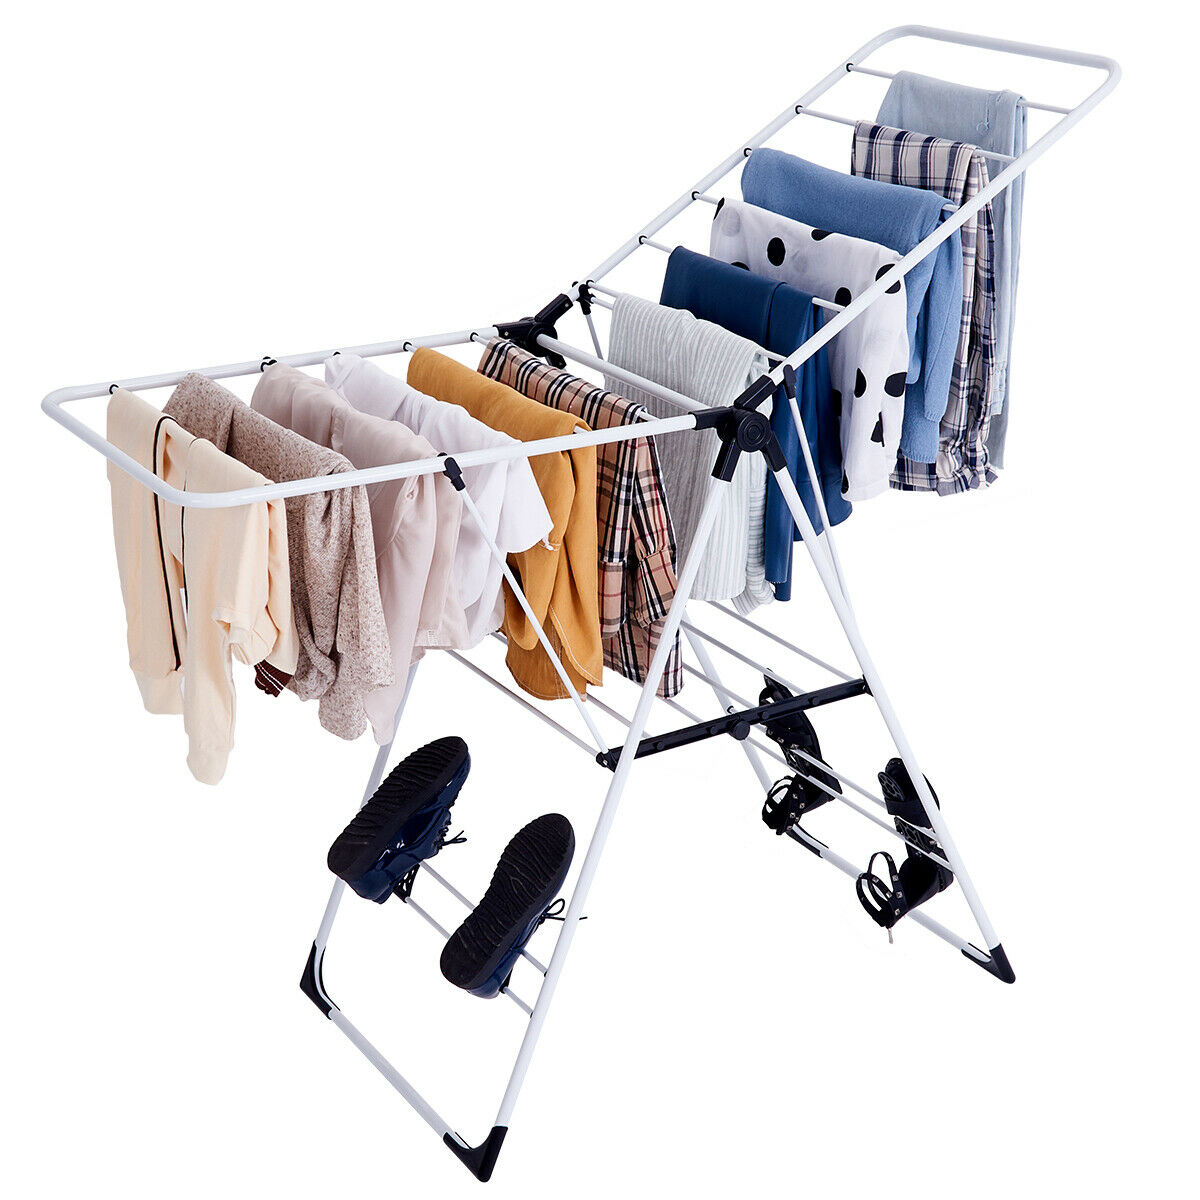 Costway Laundry Clothes Storage Drying Rack Portable Folding Dryer Hanger Heavy Duty - image 1 of 10